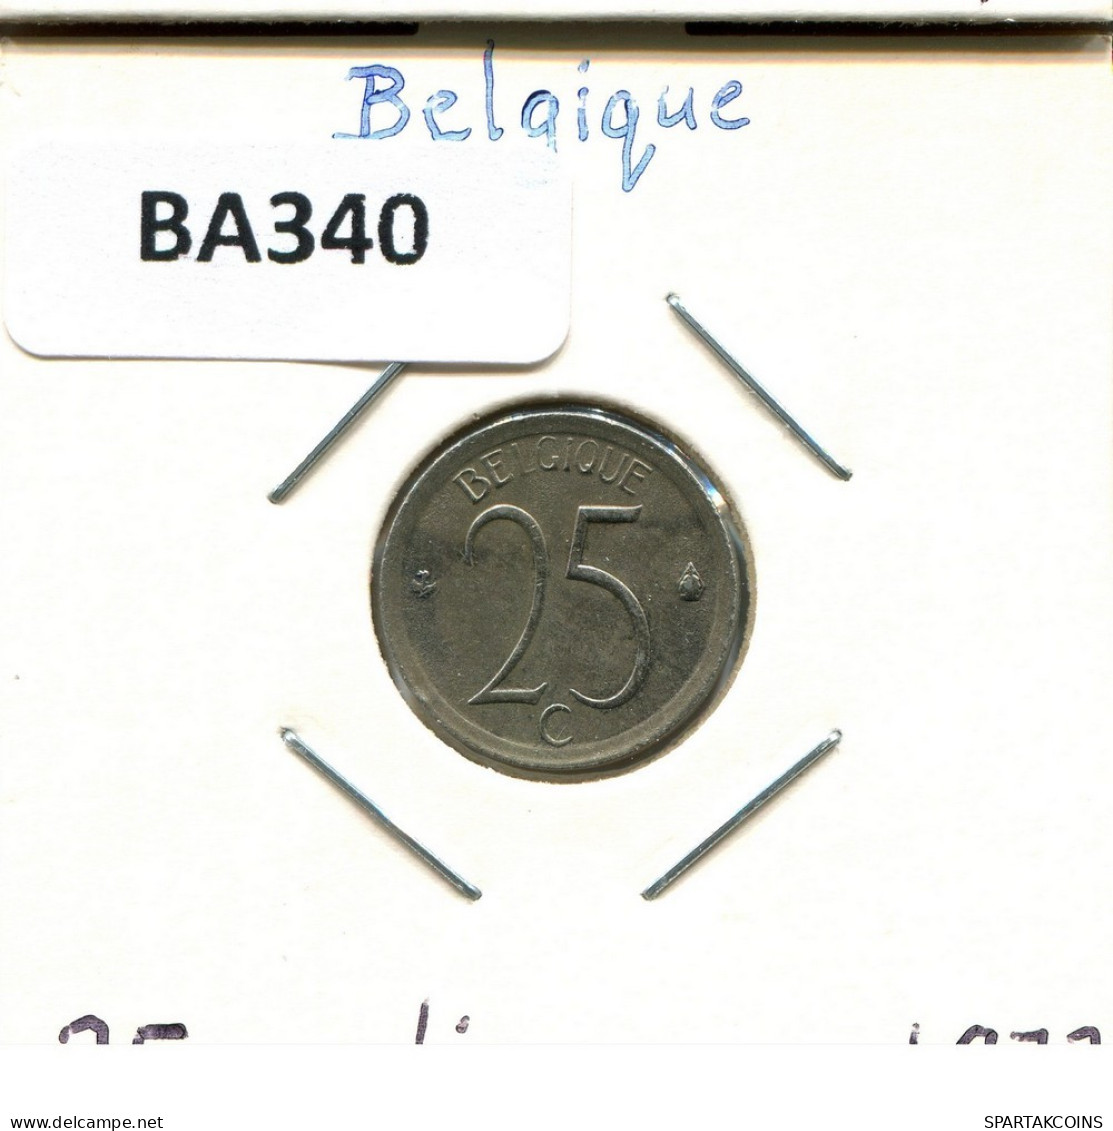 25 CENTIMES 1973 FRENCH Text BELGIUM Coin #BA340.U.A - 25 Cents